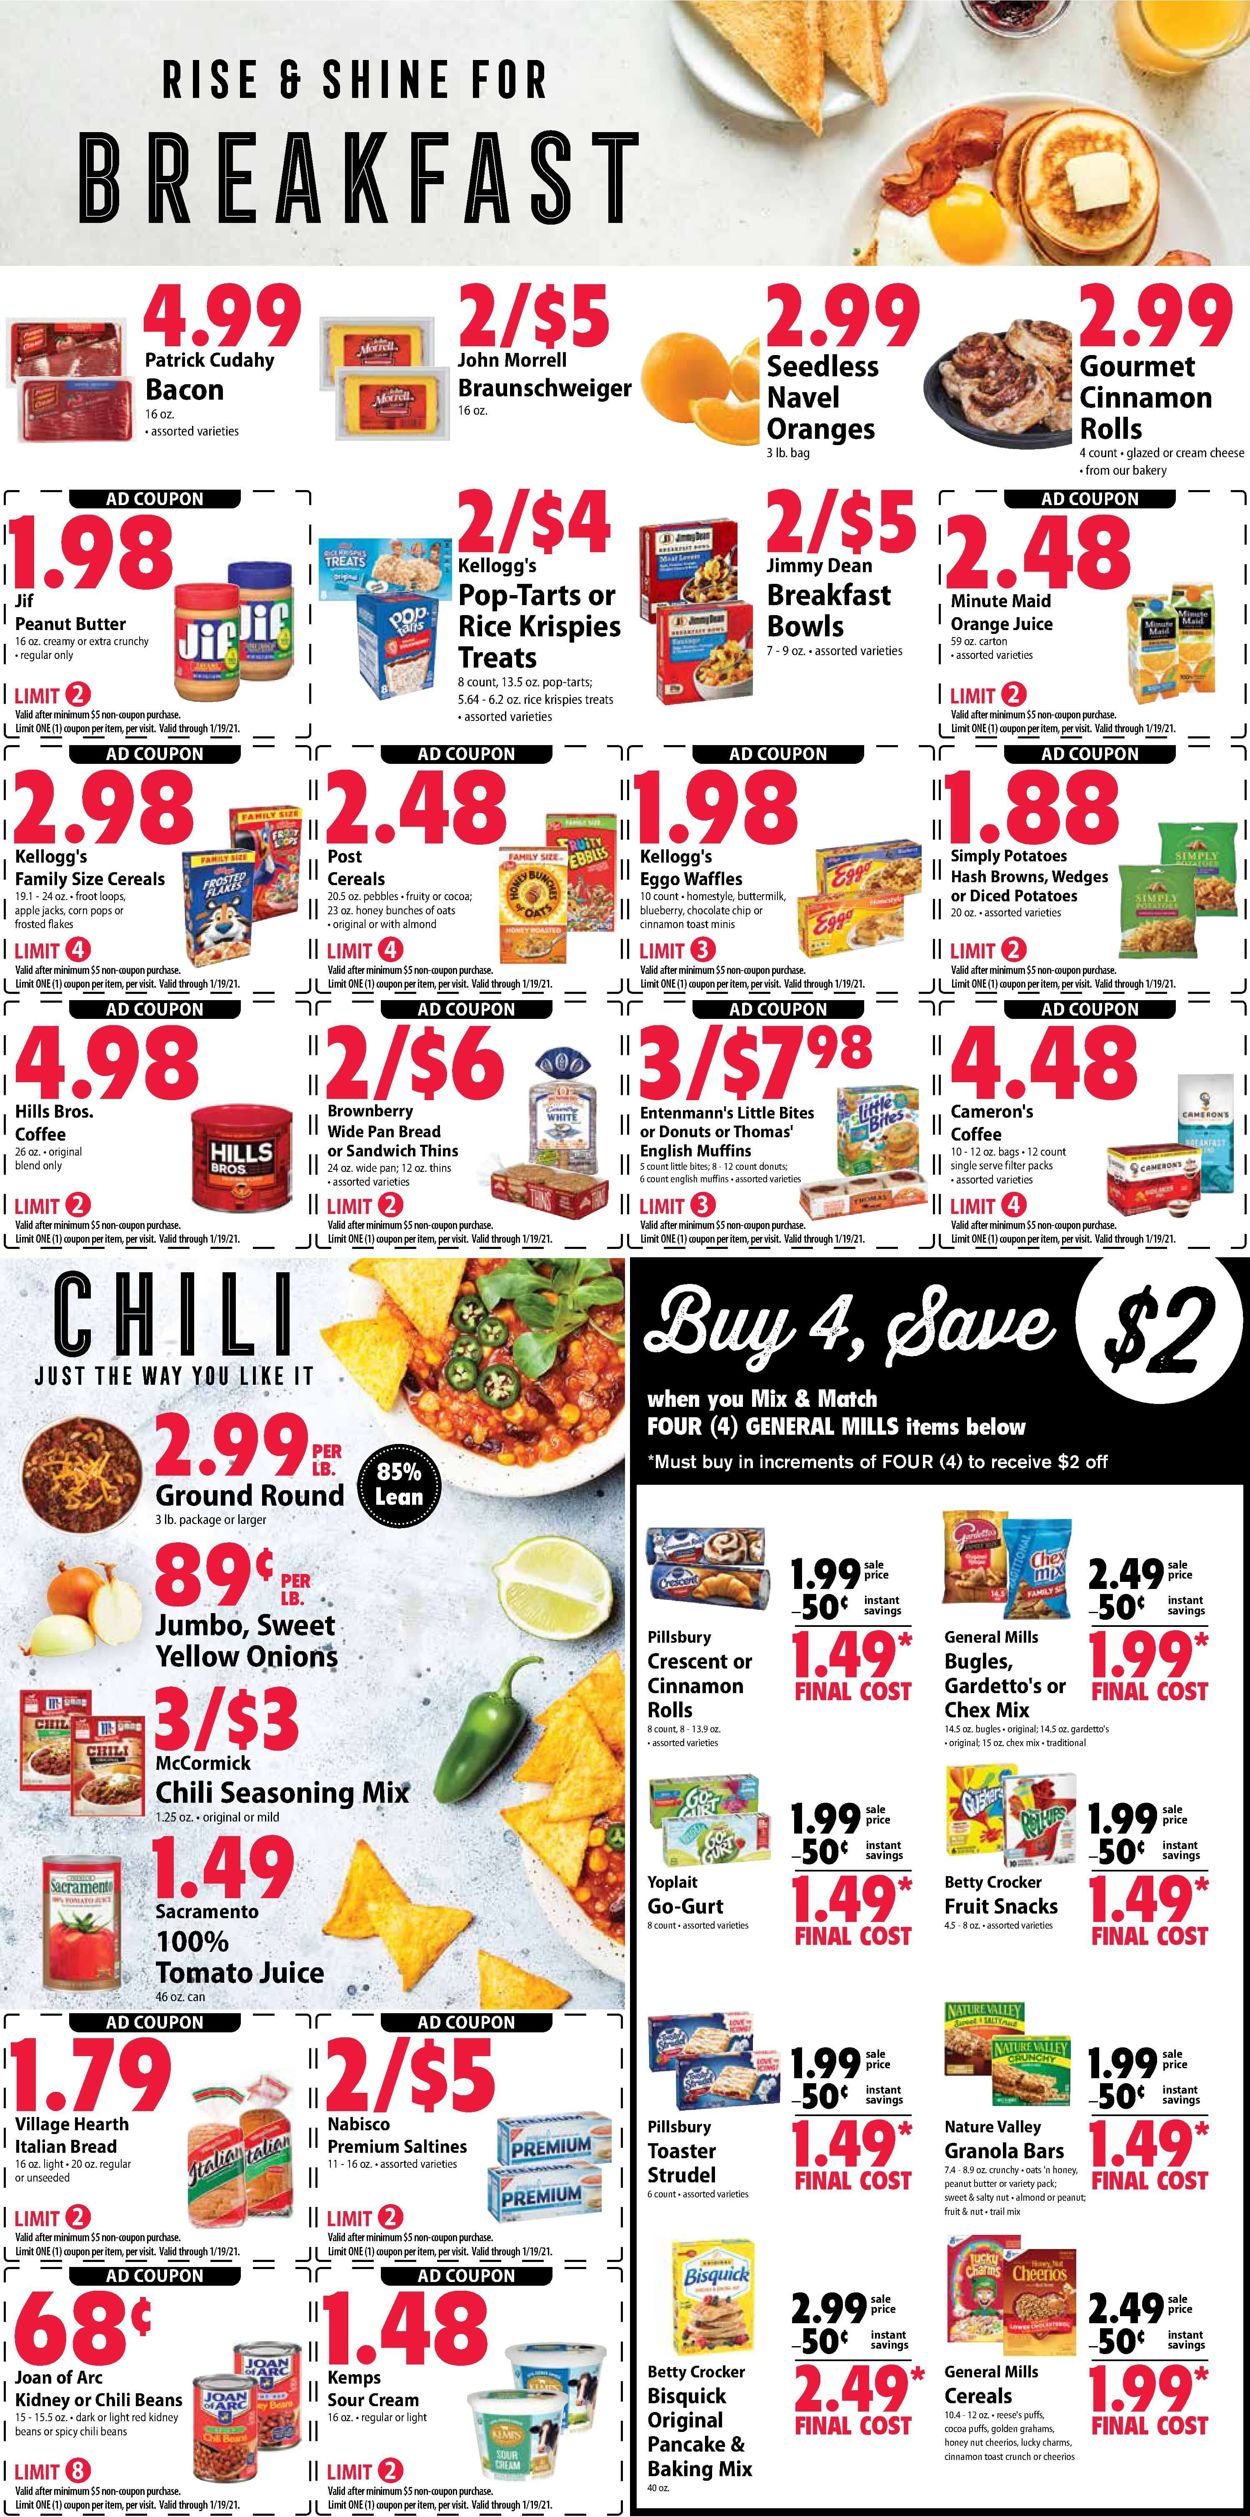 Festival Foods Current weekly ad 01/13 - 01/19/2021 [4] - frequent-ads.com